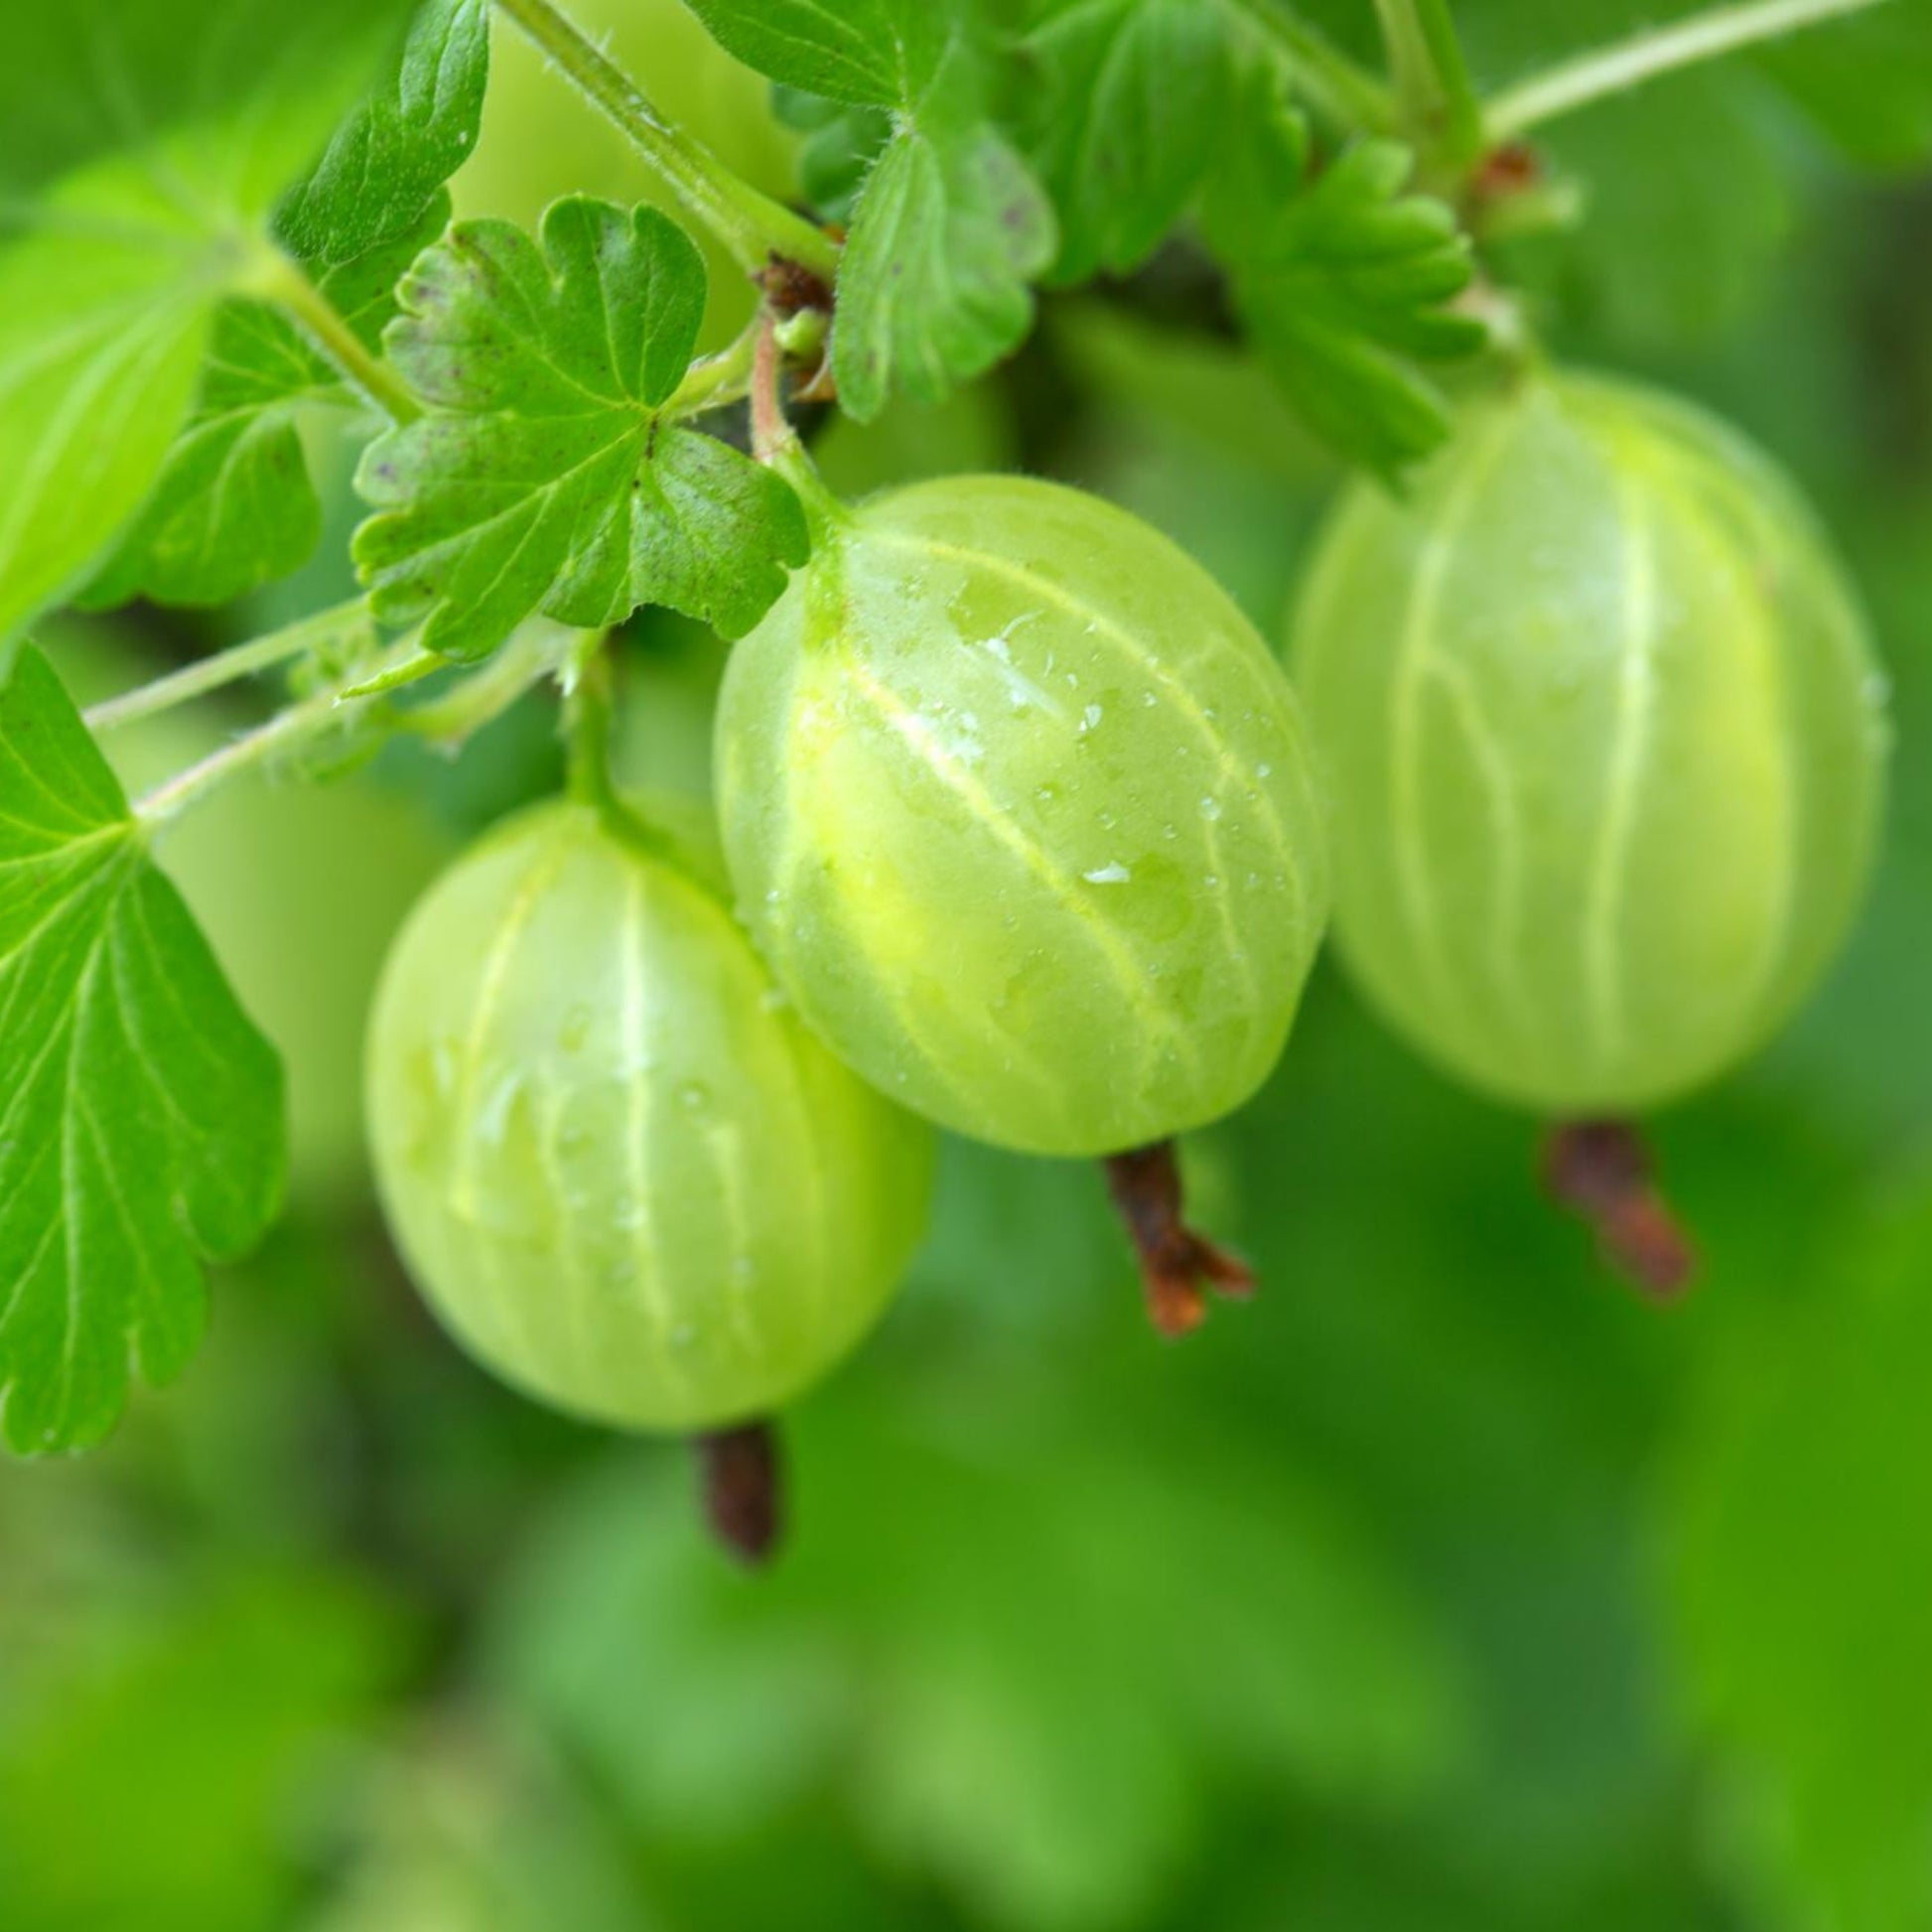 Organic Gooseberry Seeds - Indian Gooseberry Seeds - Amla Phyllanthus Emblica - Grow Your Own Food At Home! - Fresh Seeds!